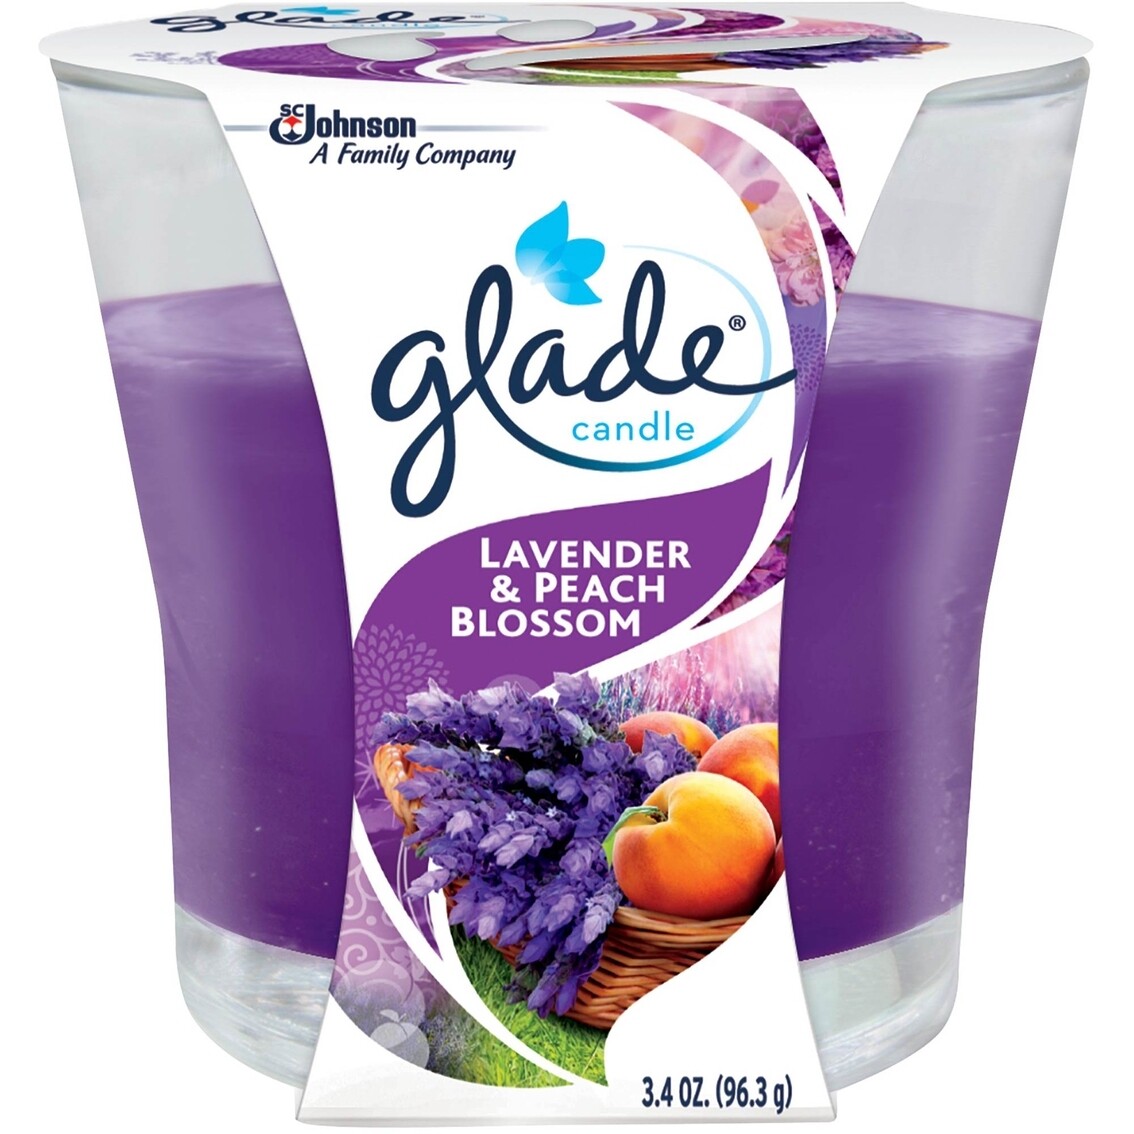 Household / Air Freshener / Glade Candle, Lavender and Peach